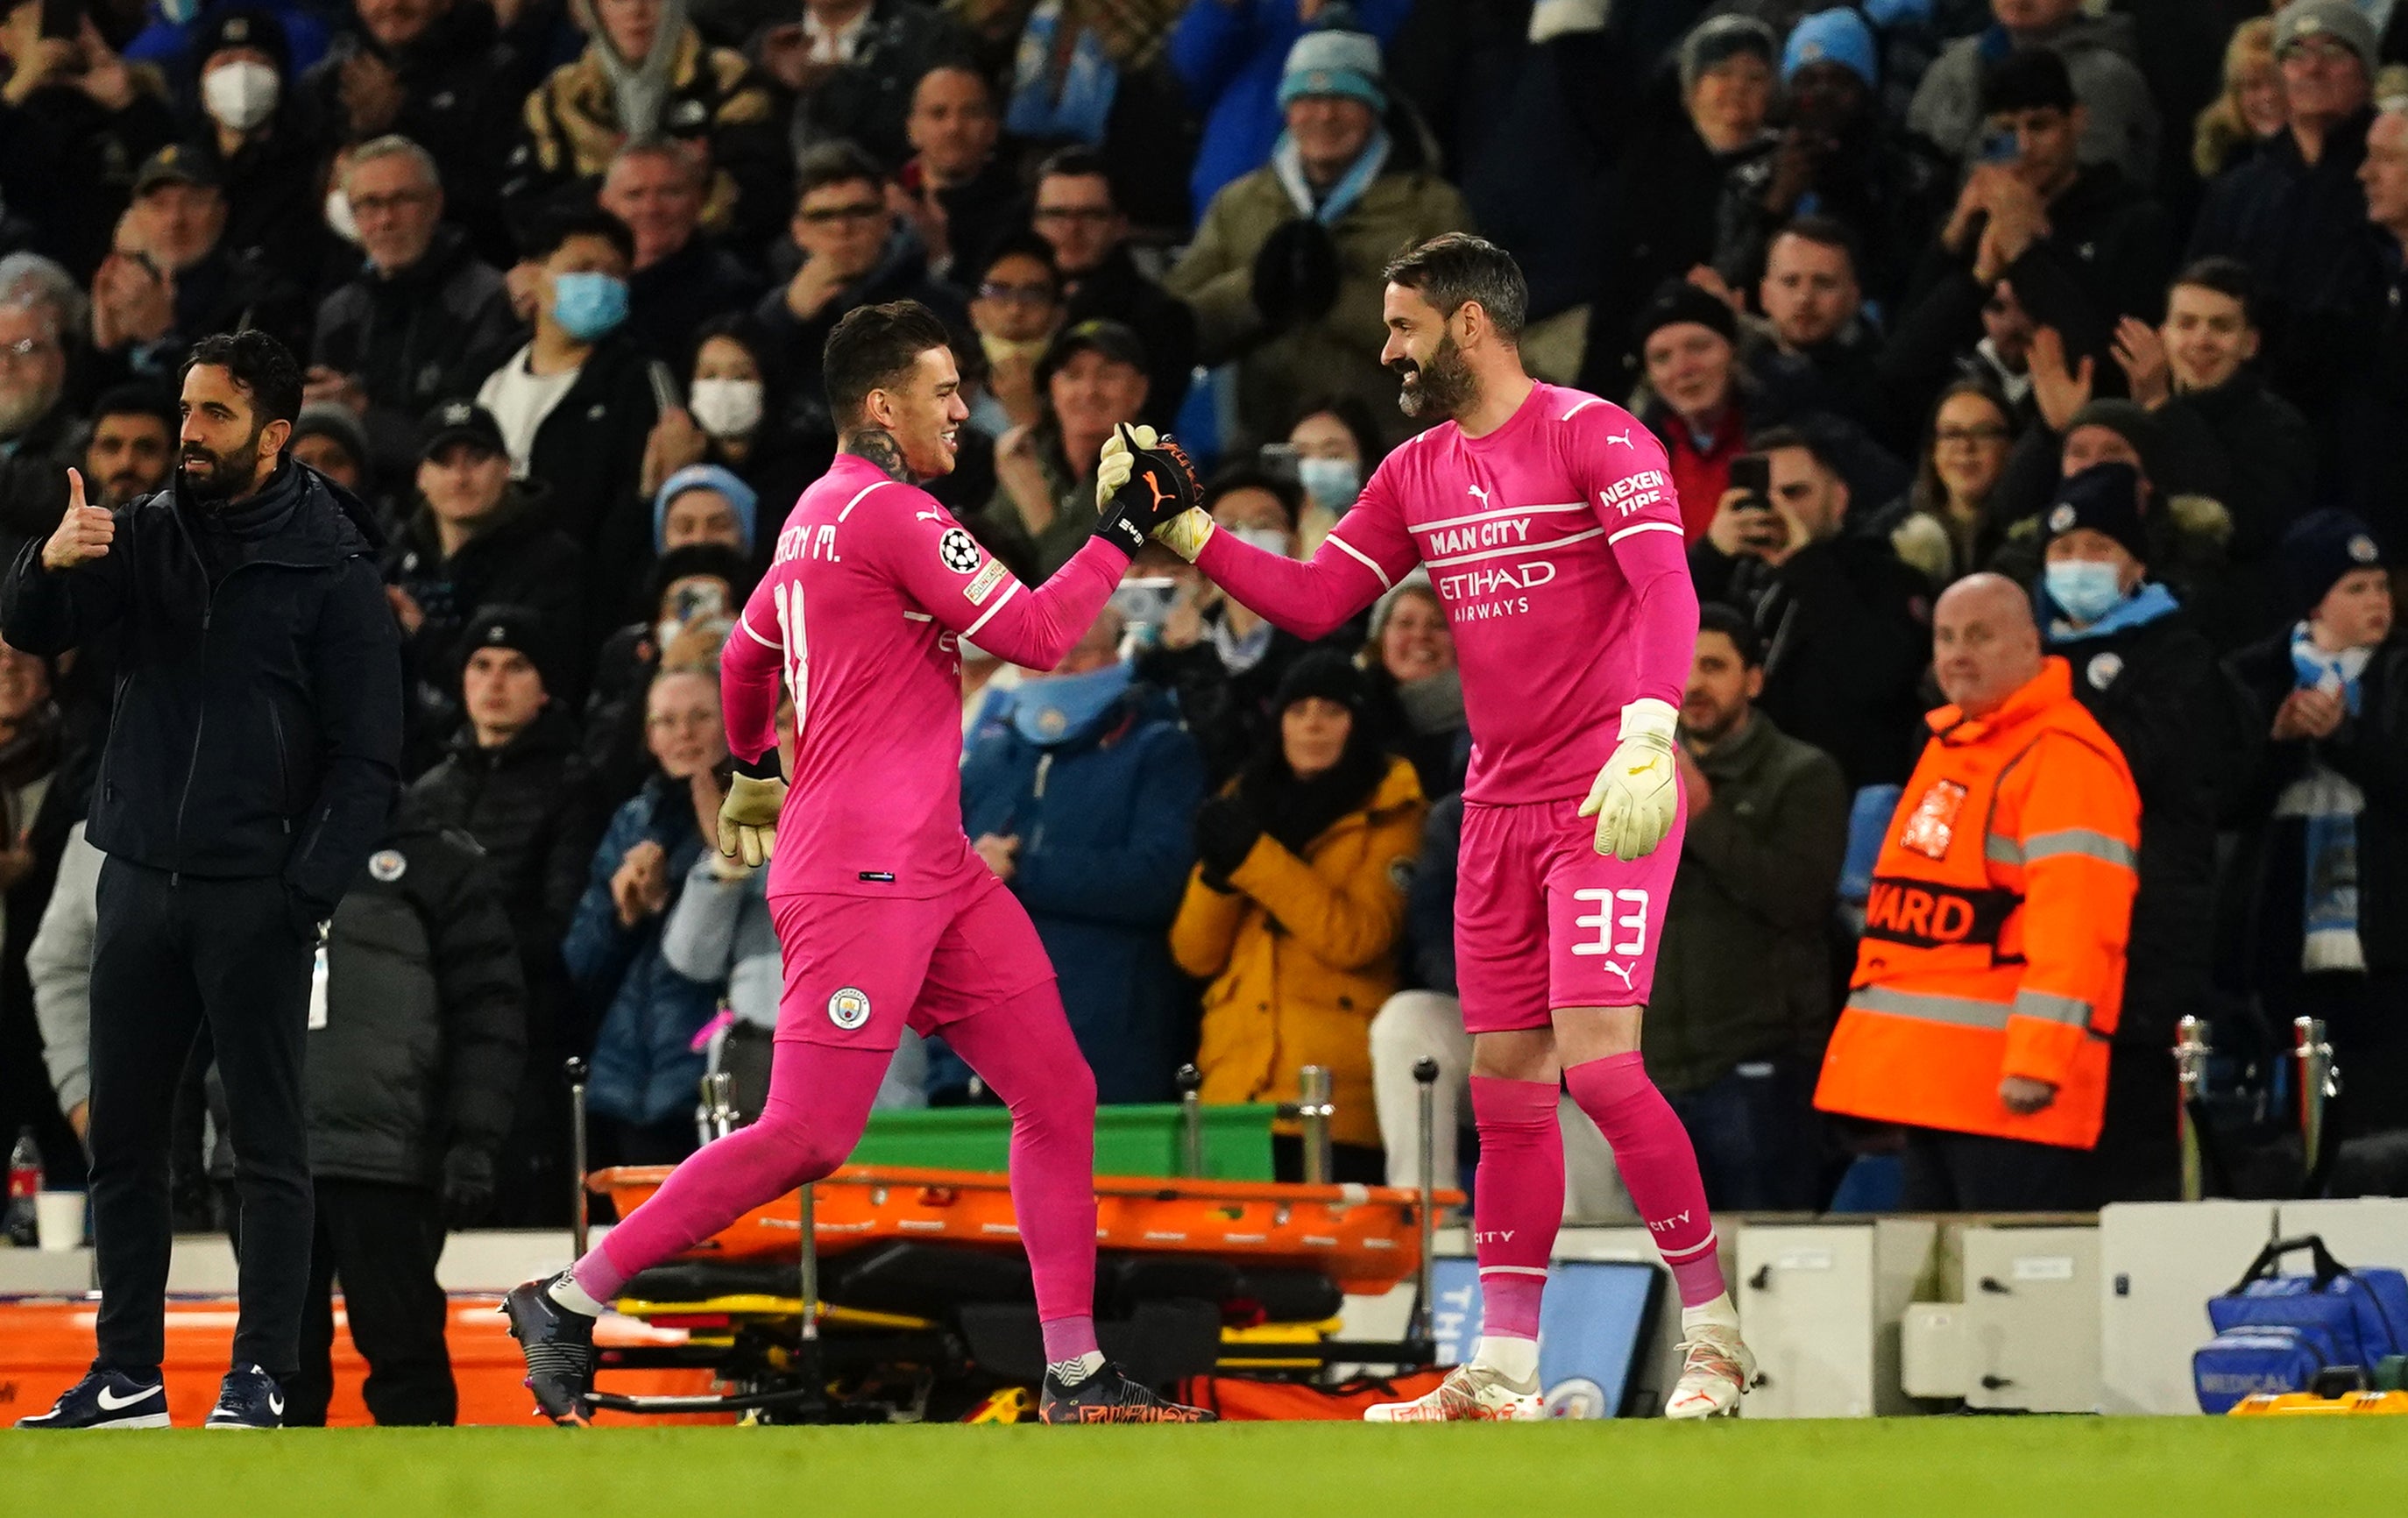 A rare Champions League outing for Scott Carson (right) saw him make an important late save (Martin Rickett/PA)